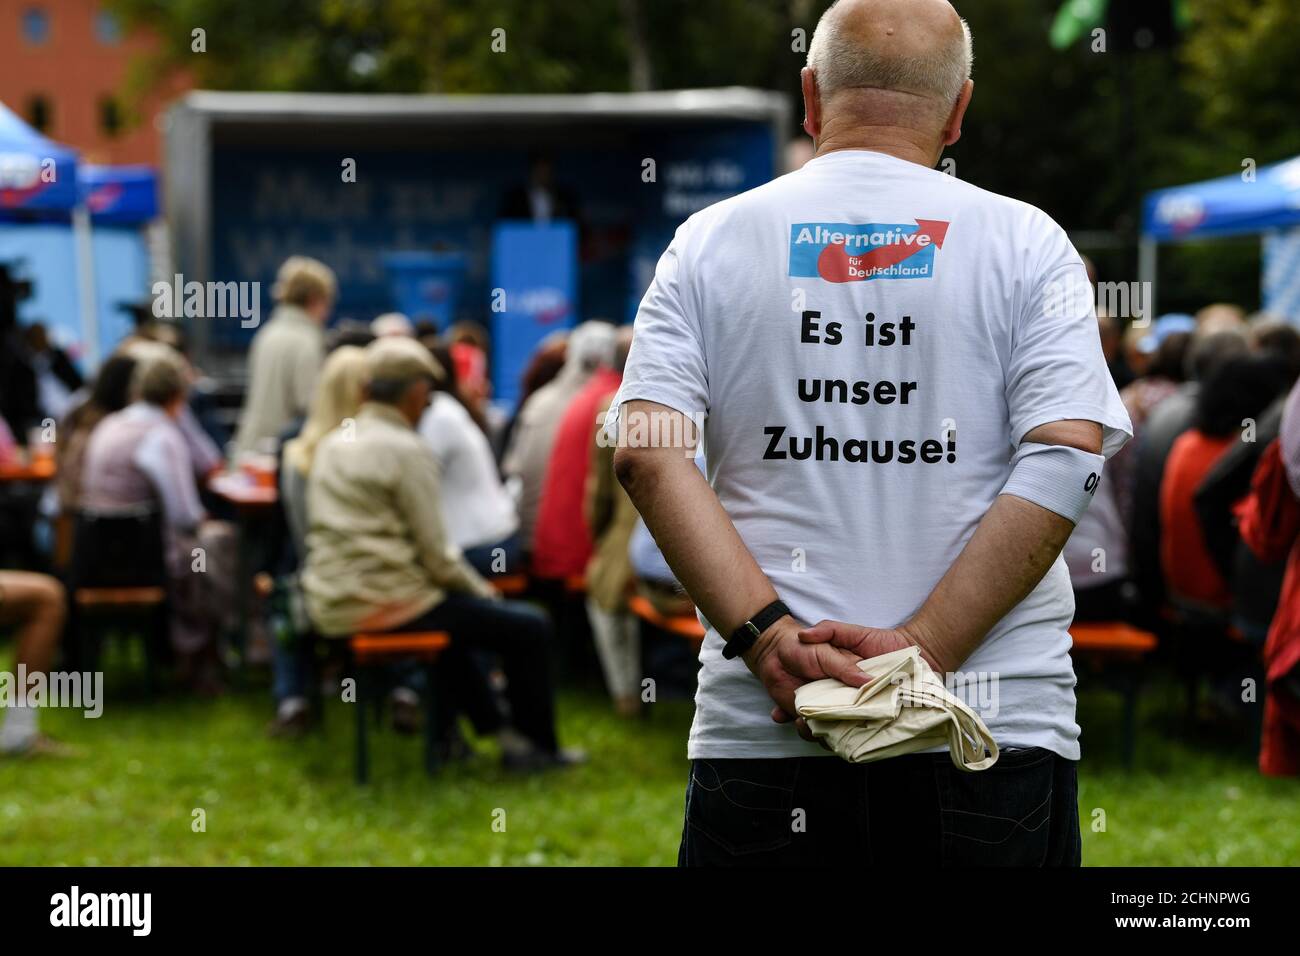 A supporter of the Alternative for Germany (AfD) wears a t-shirt reading 'It is our home' ('Es ist unser Zuhause') at the Gillamoos Fair, one of Bavaria's oldest fairs, in Abensberg, Germany September 2, 2019. REUTERS/Andreas Gebert Stock Photo